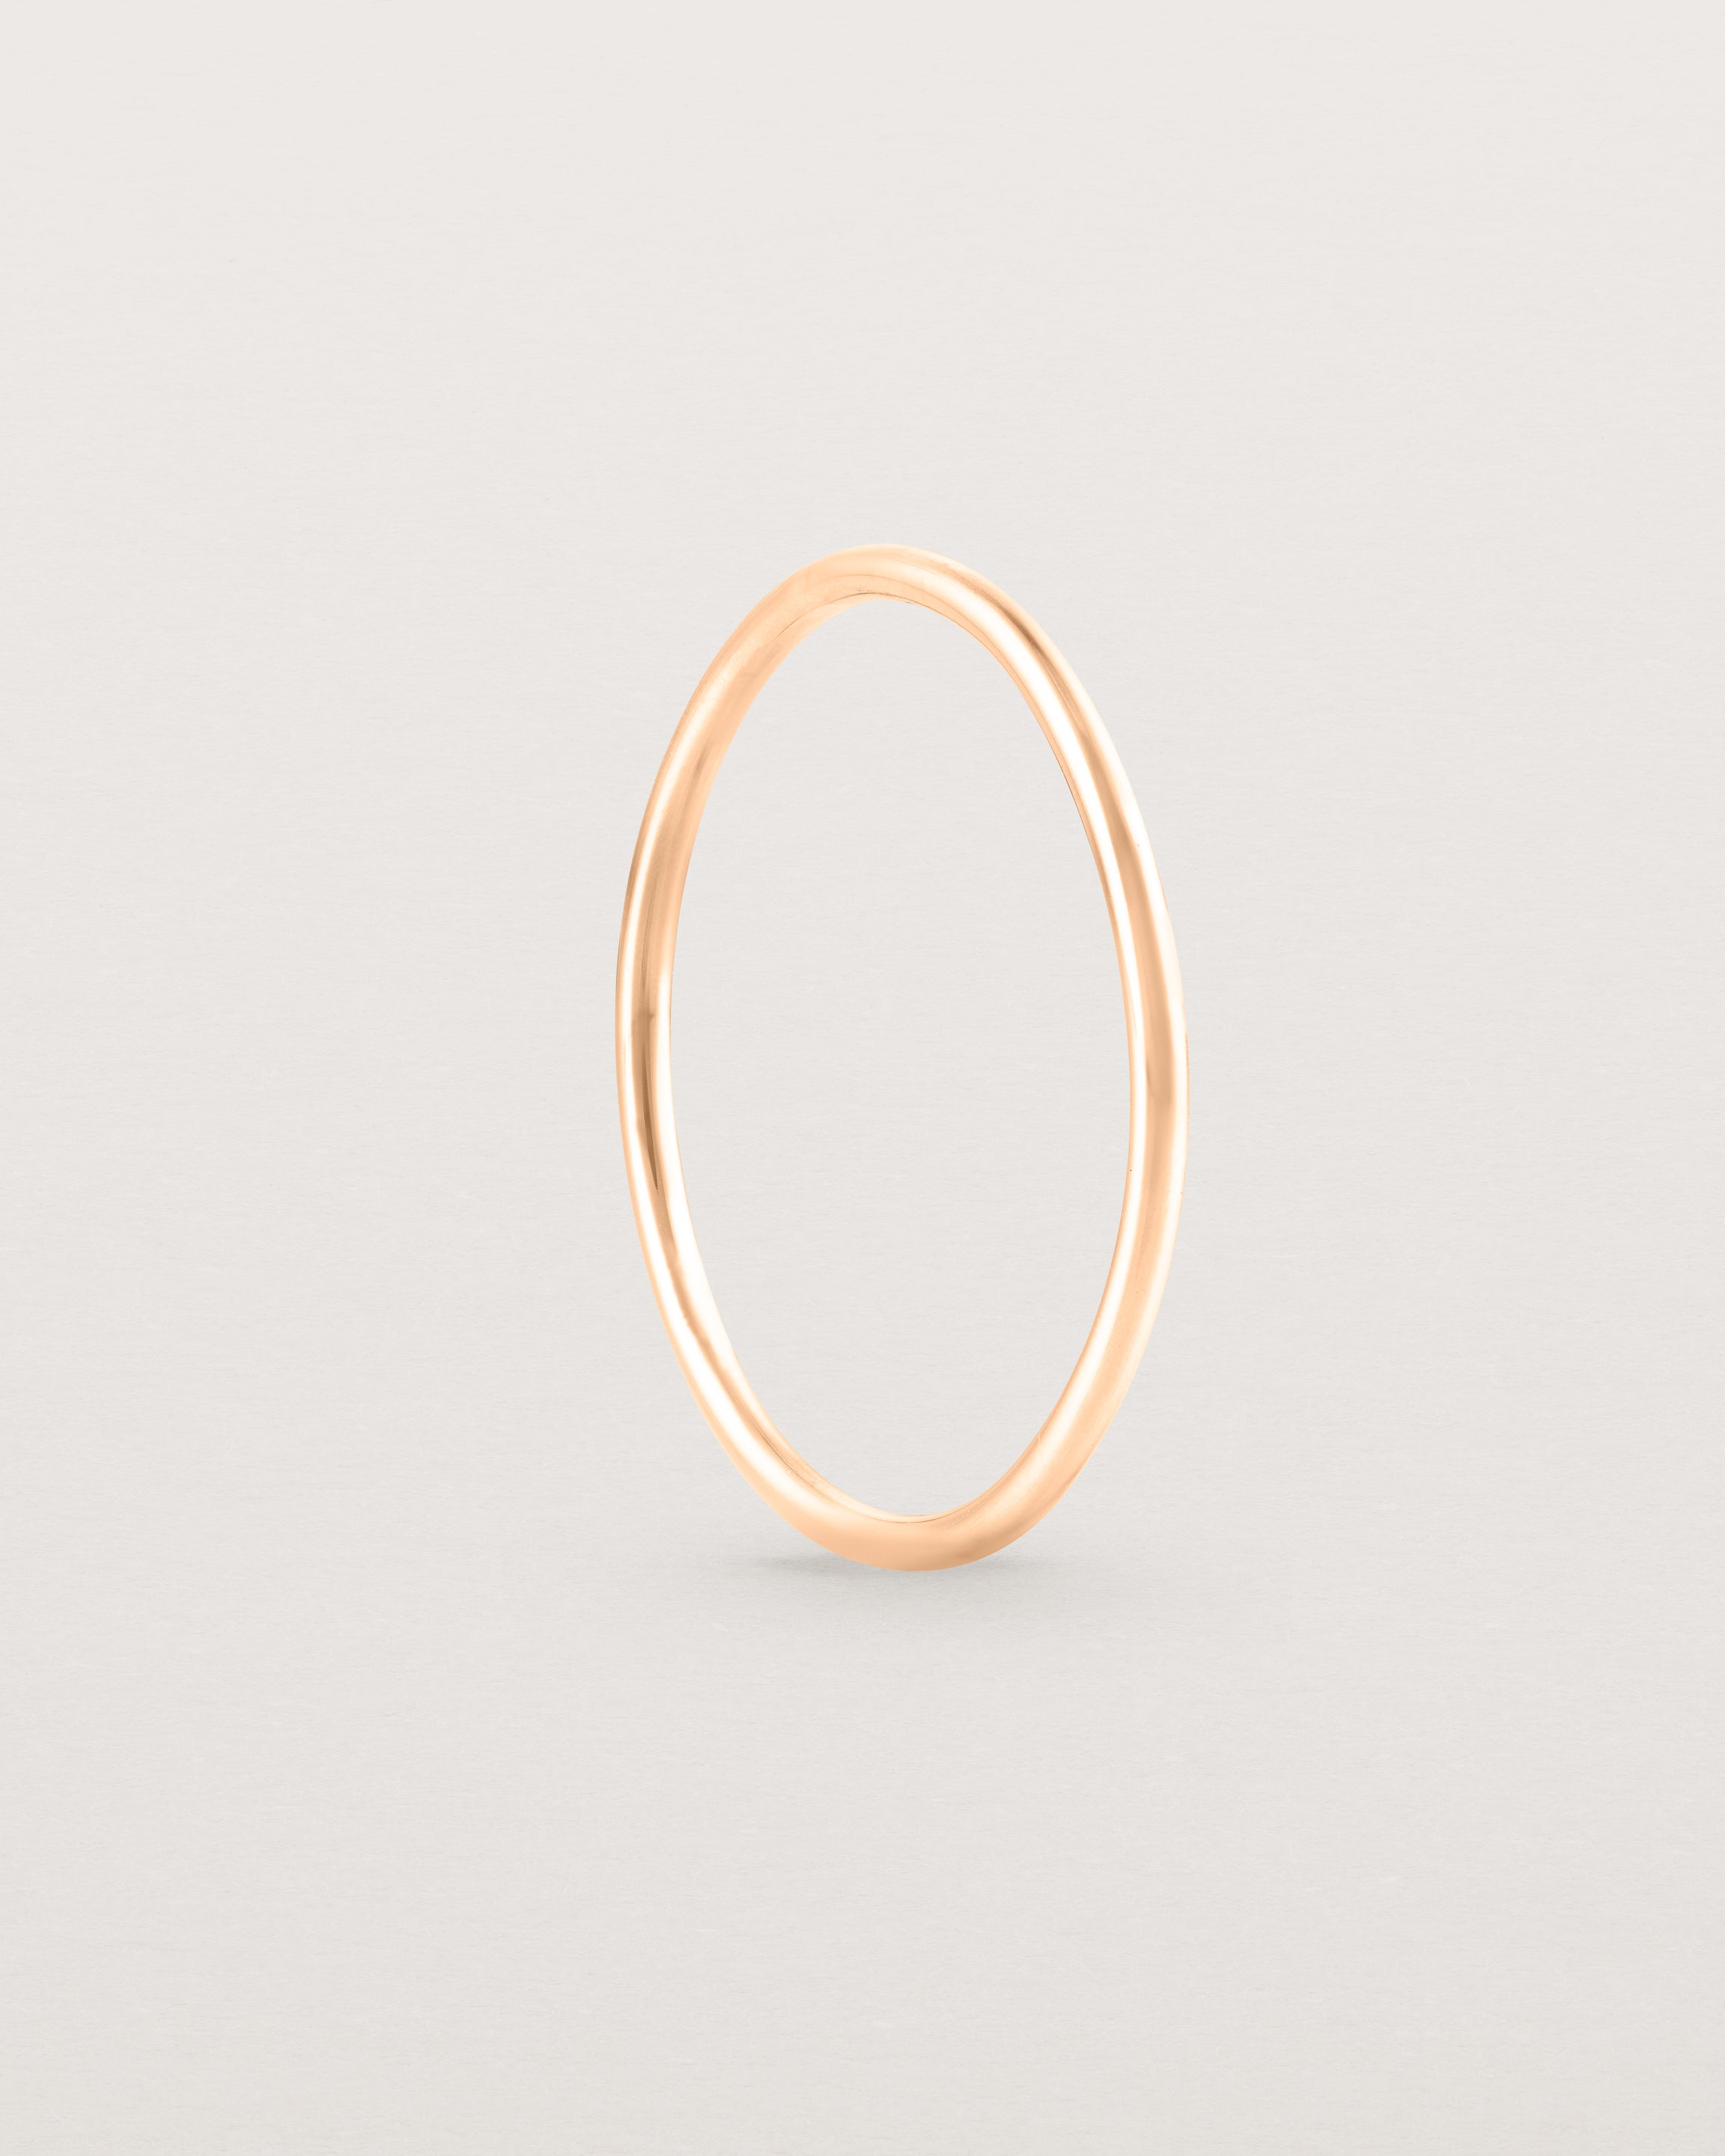 Standing view of the Fine Stacking Ring in rose gold.